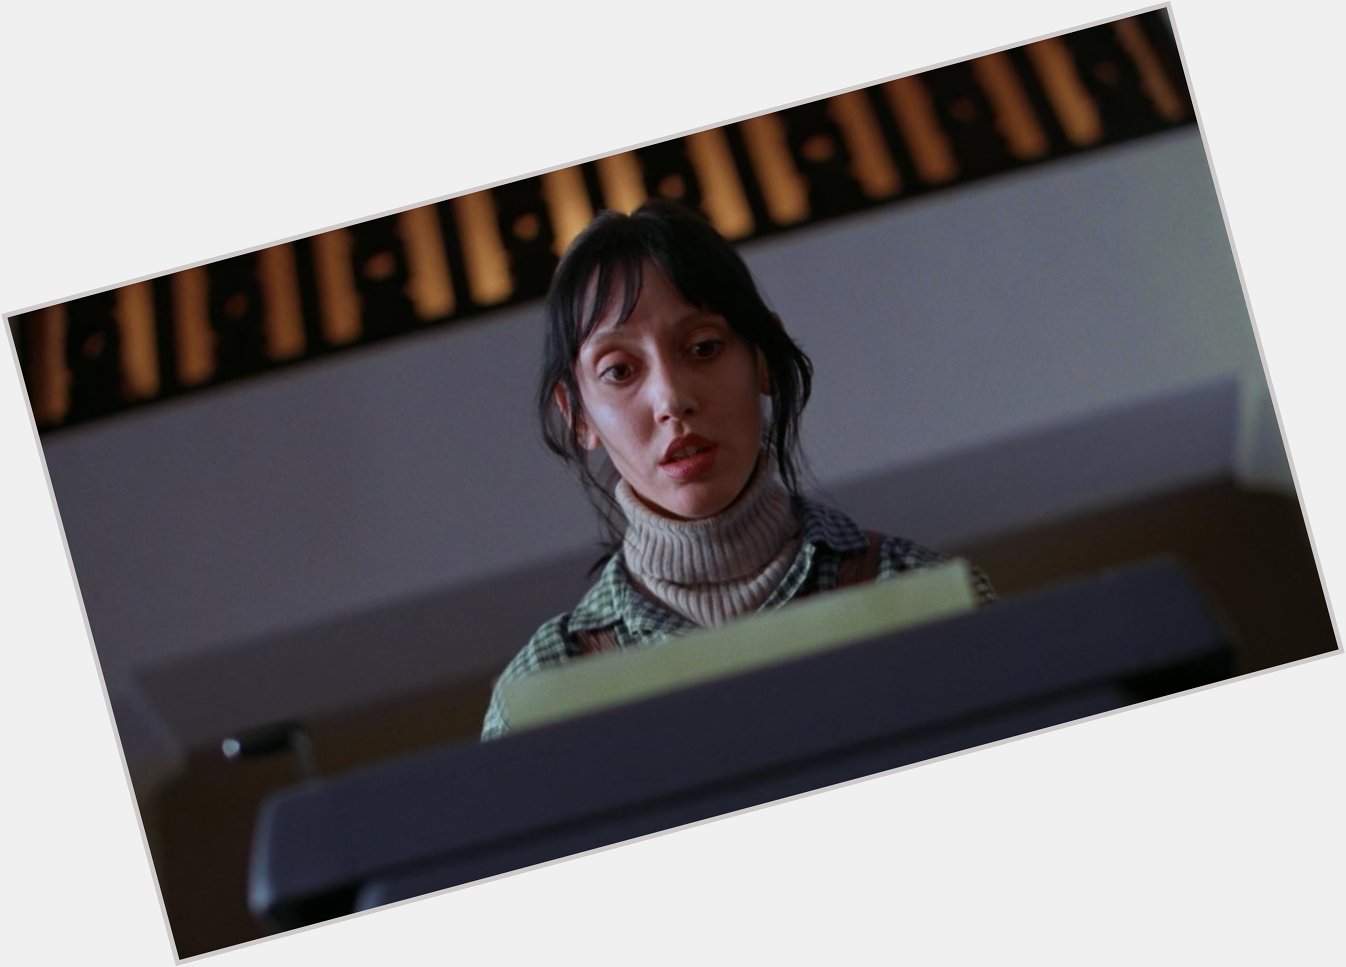 Happy birthday to Shelley Duvall who turns 70 today! - Mike 